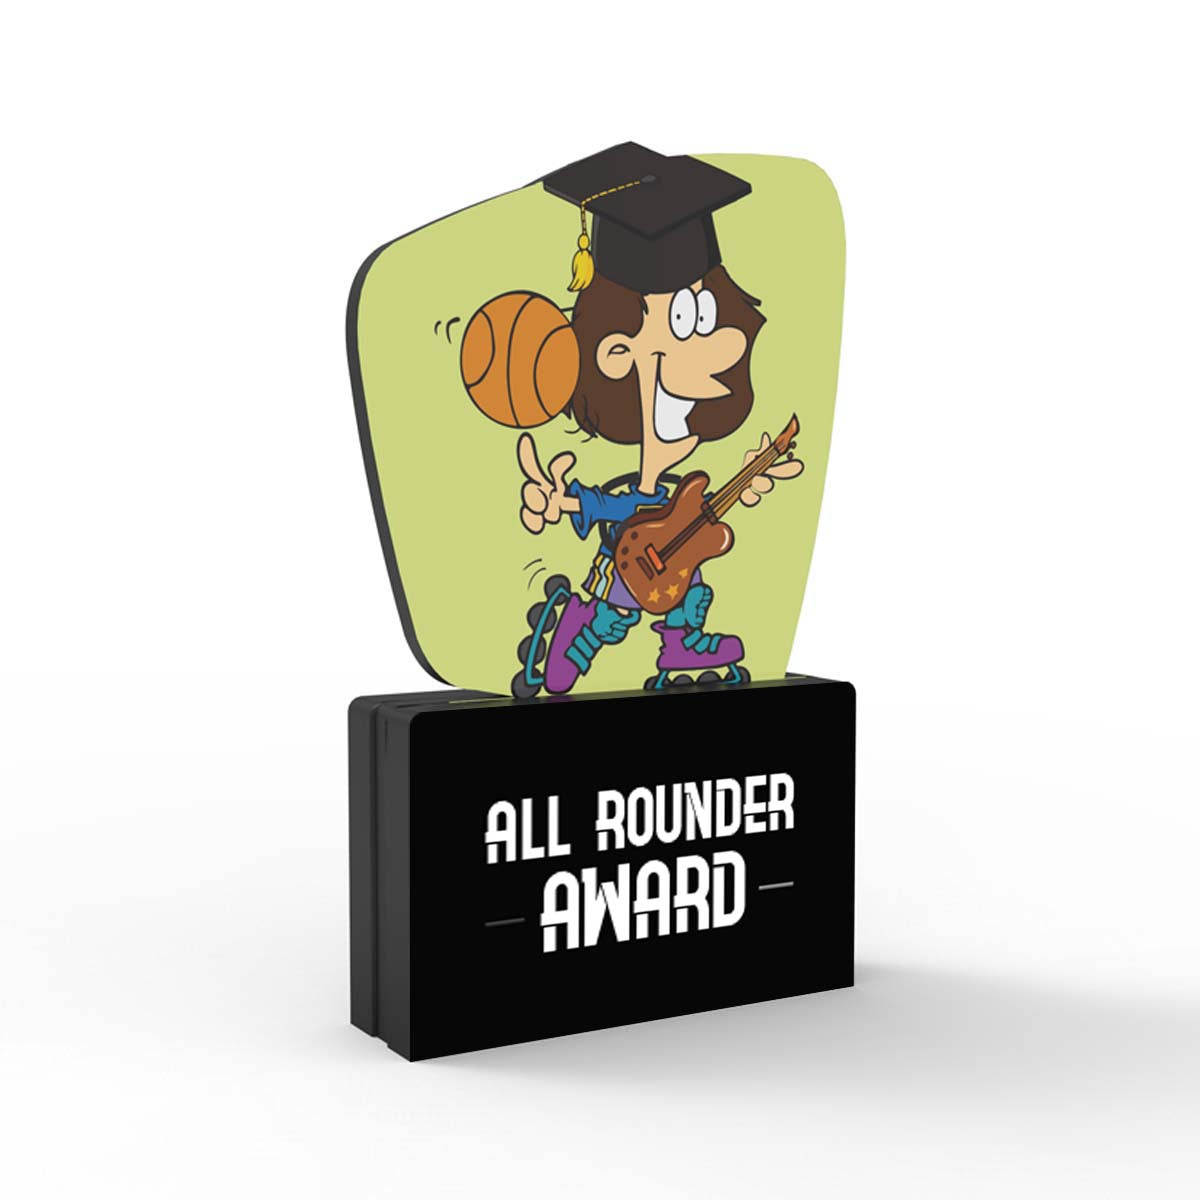 All-rounder Award – Engrave - Awards and More